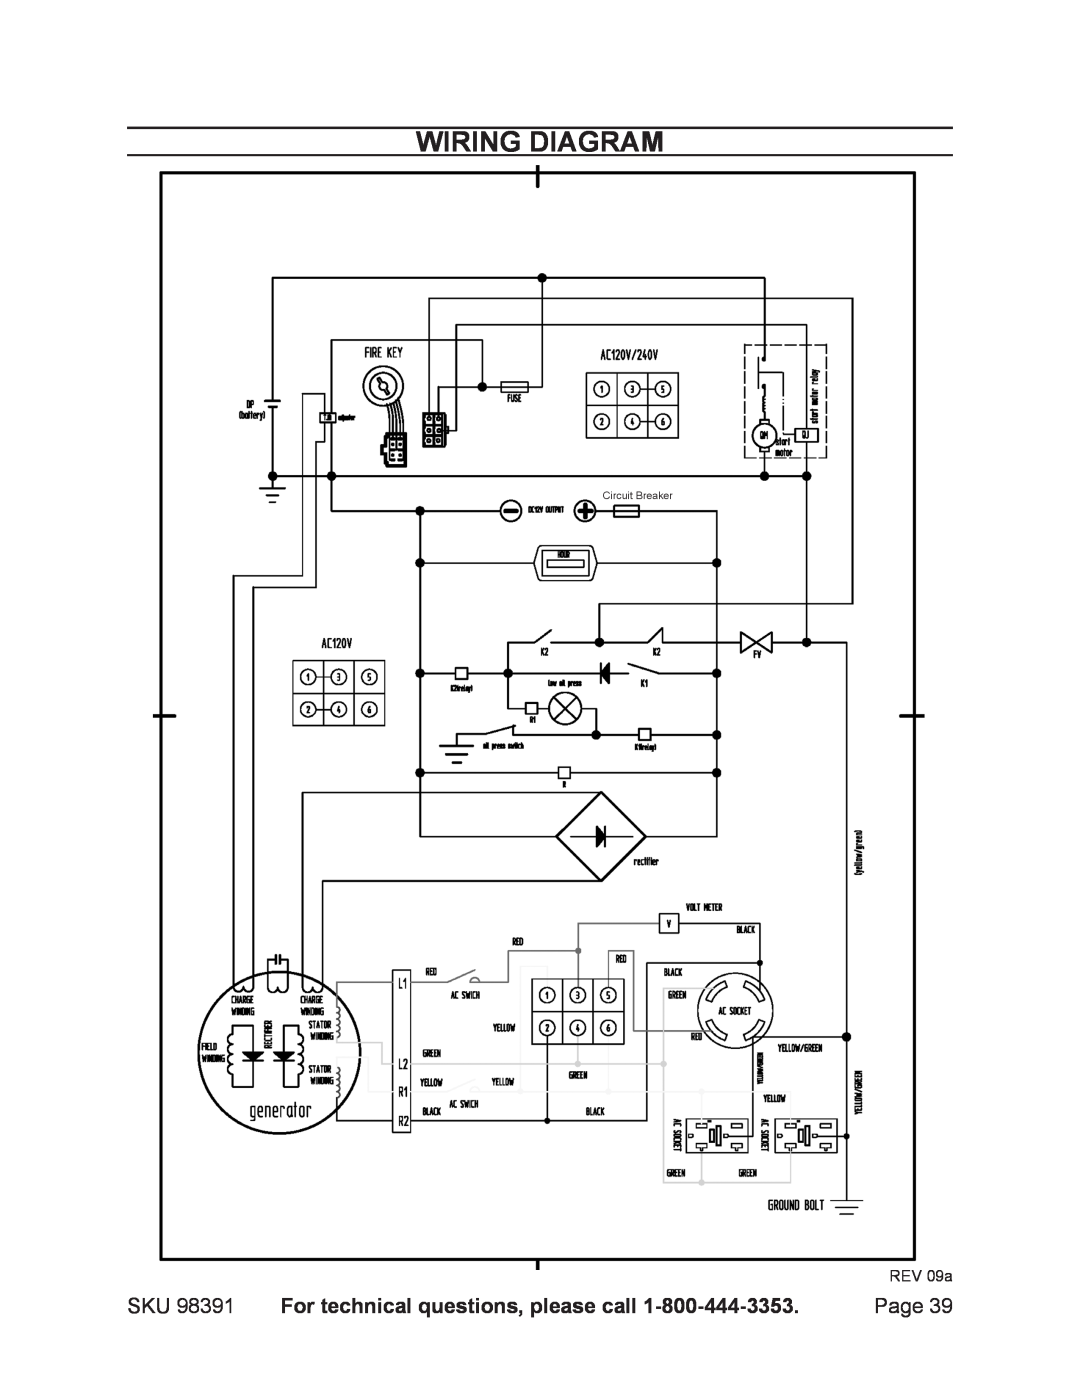 Chicago Electric 98391 manual Wiring diagram, For technical questions, please call, REV 09a, Circuit Breaker 